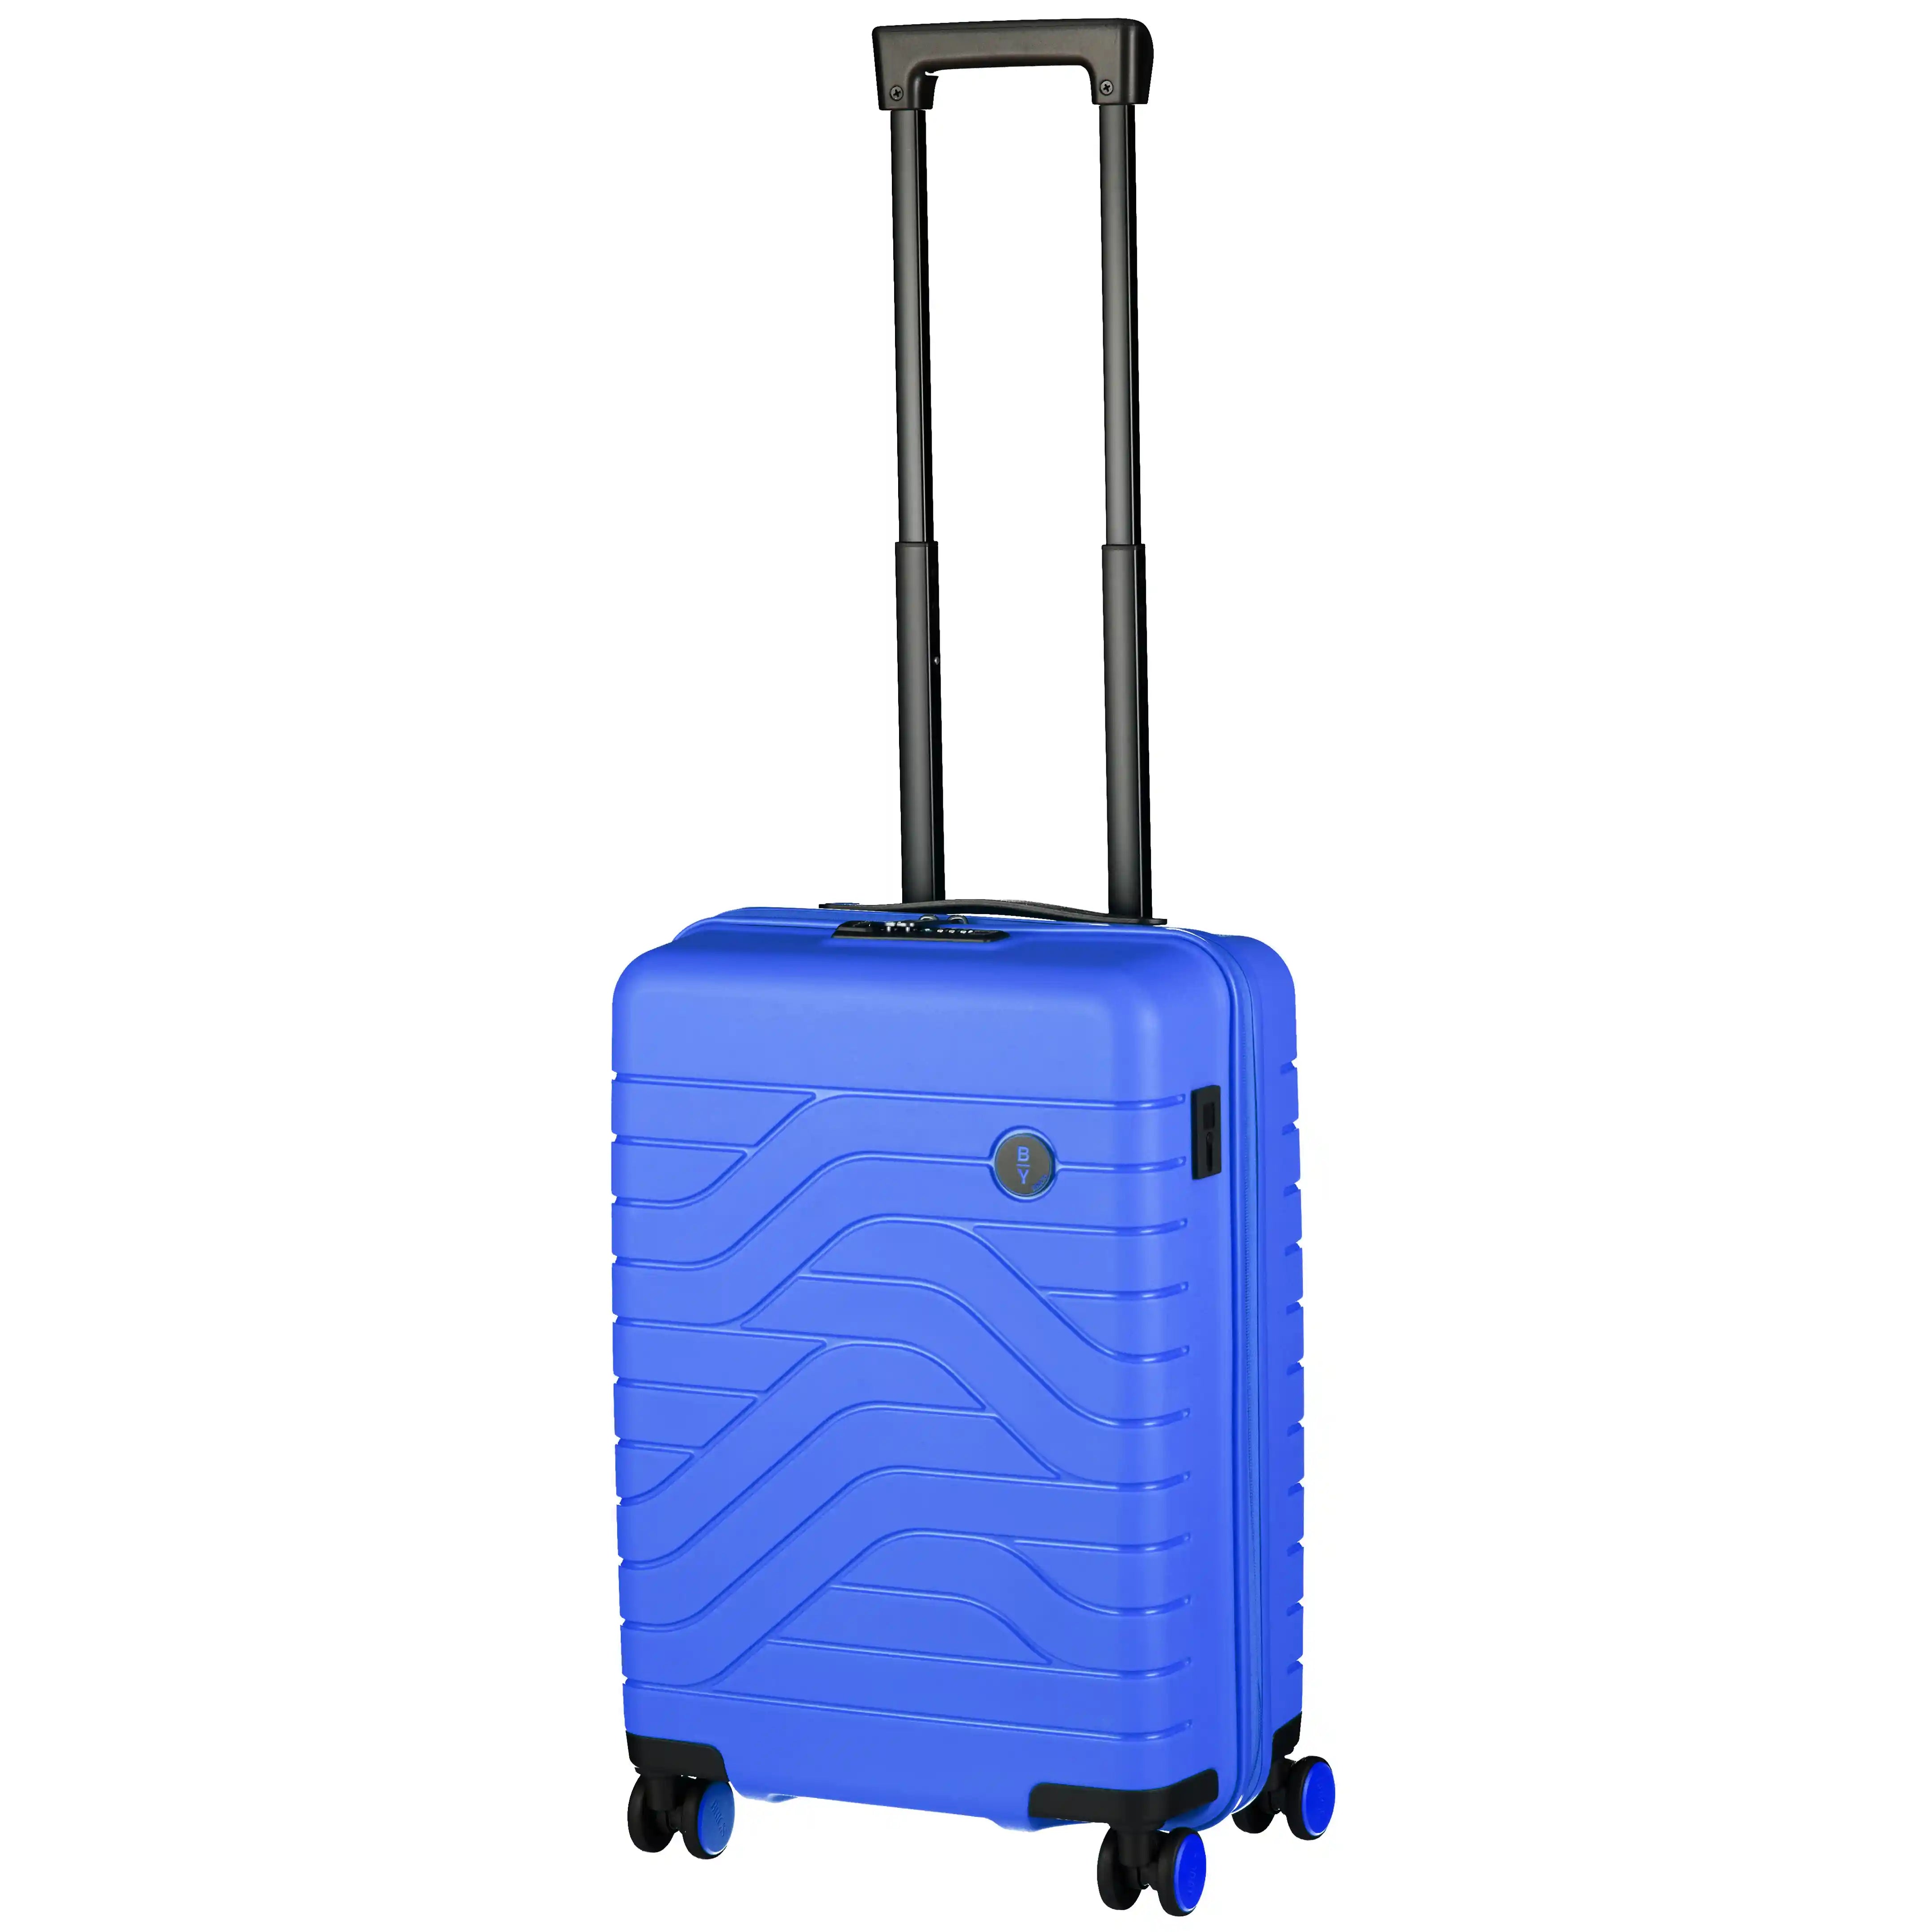 BY by Brics Ulisse 4-Rollen Kabinentrolley 55 cm - Electric Blue